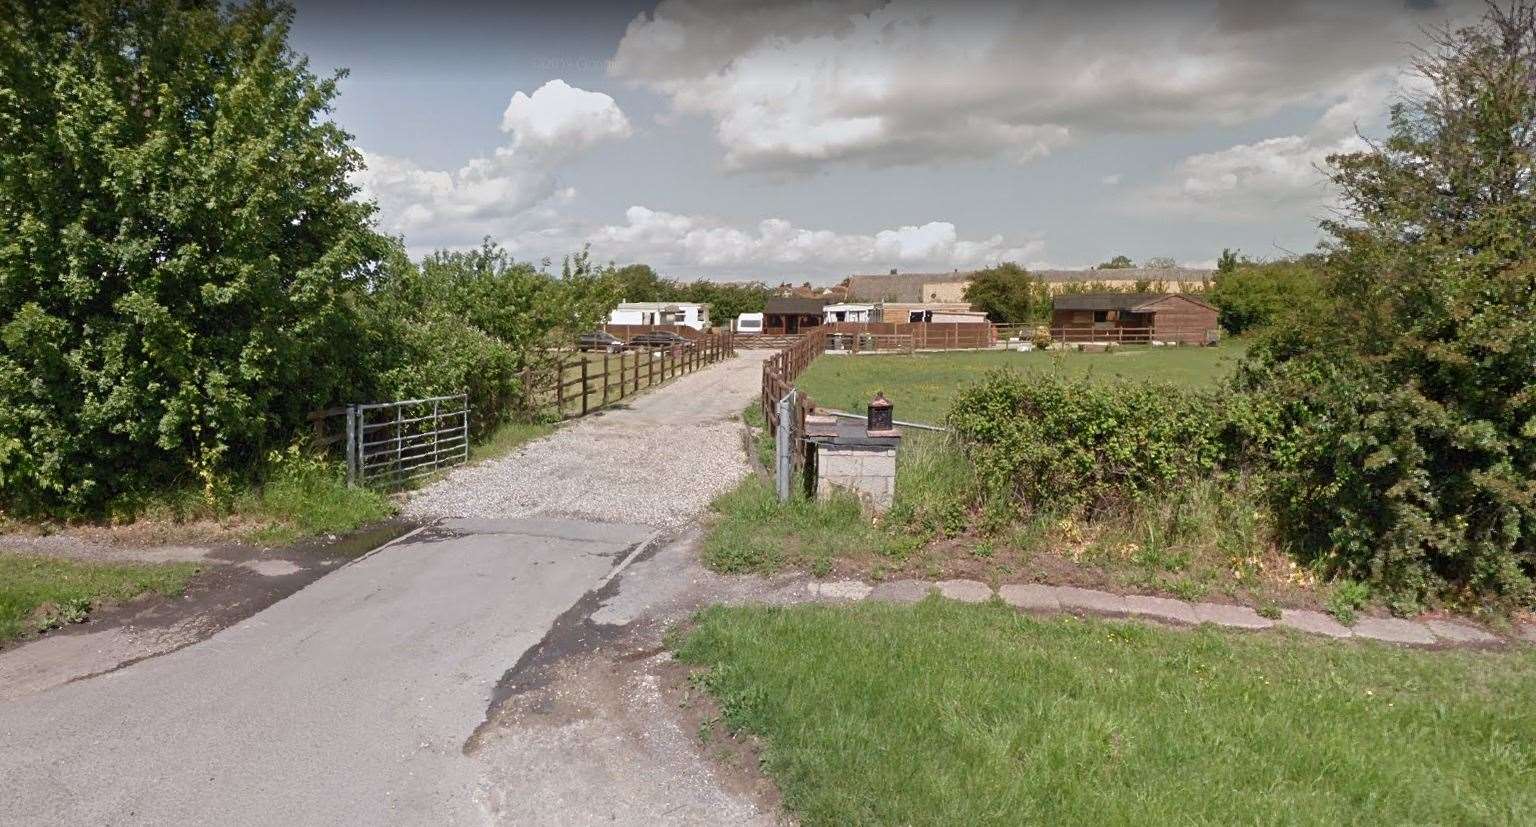 Plans to treble the size of the site off the Old Thanet Way will be voted on by councillors. Picture: Google